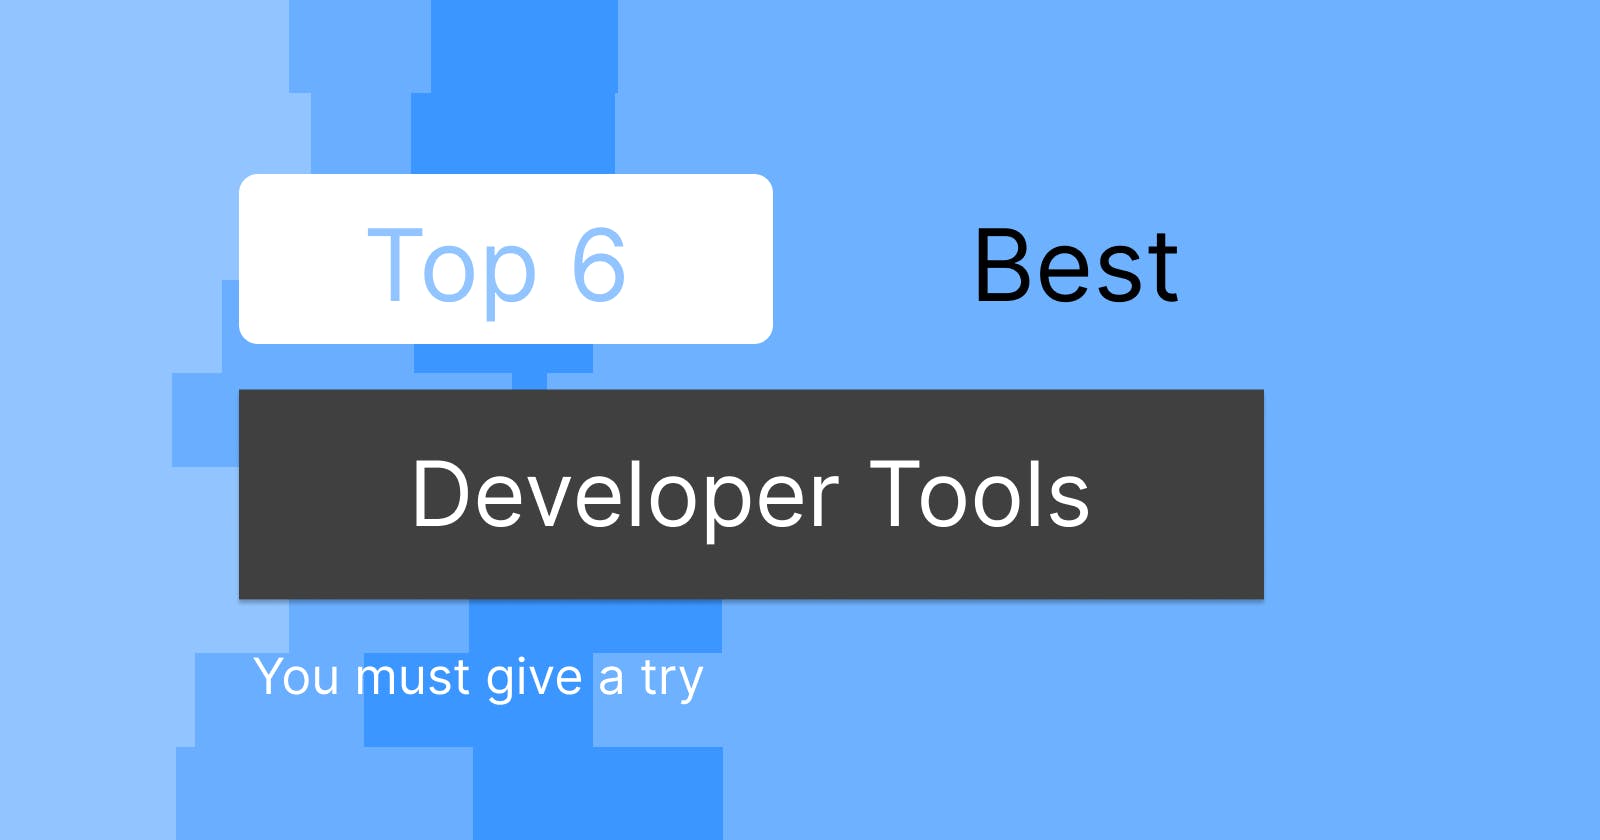 Top 6 dev tools you must use!